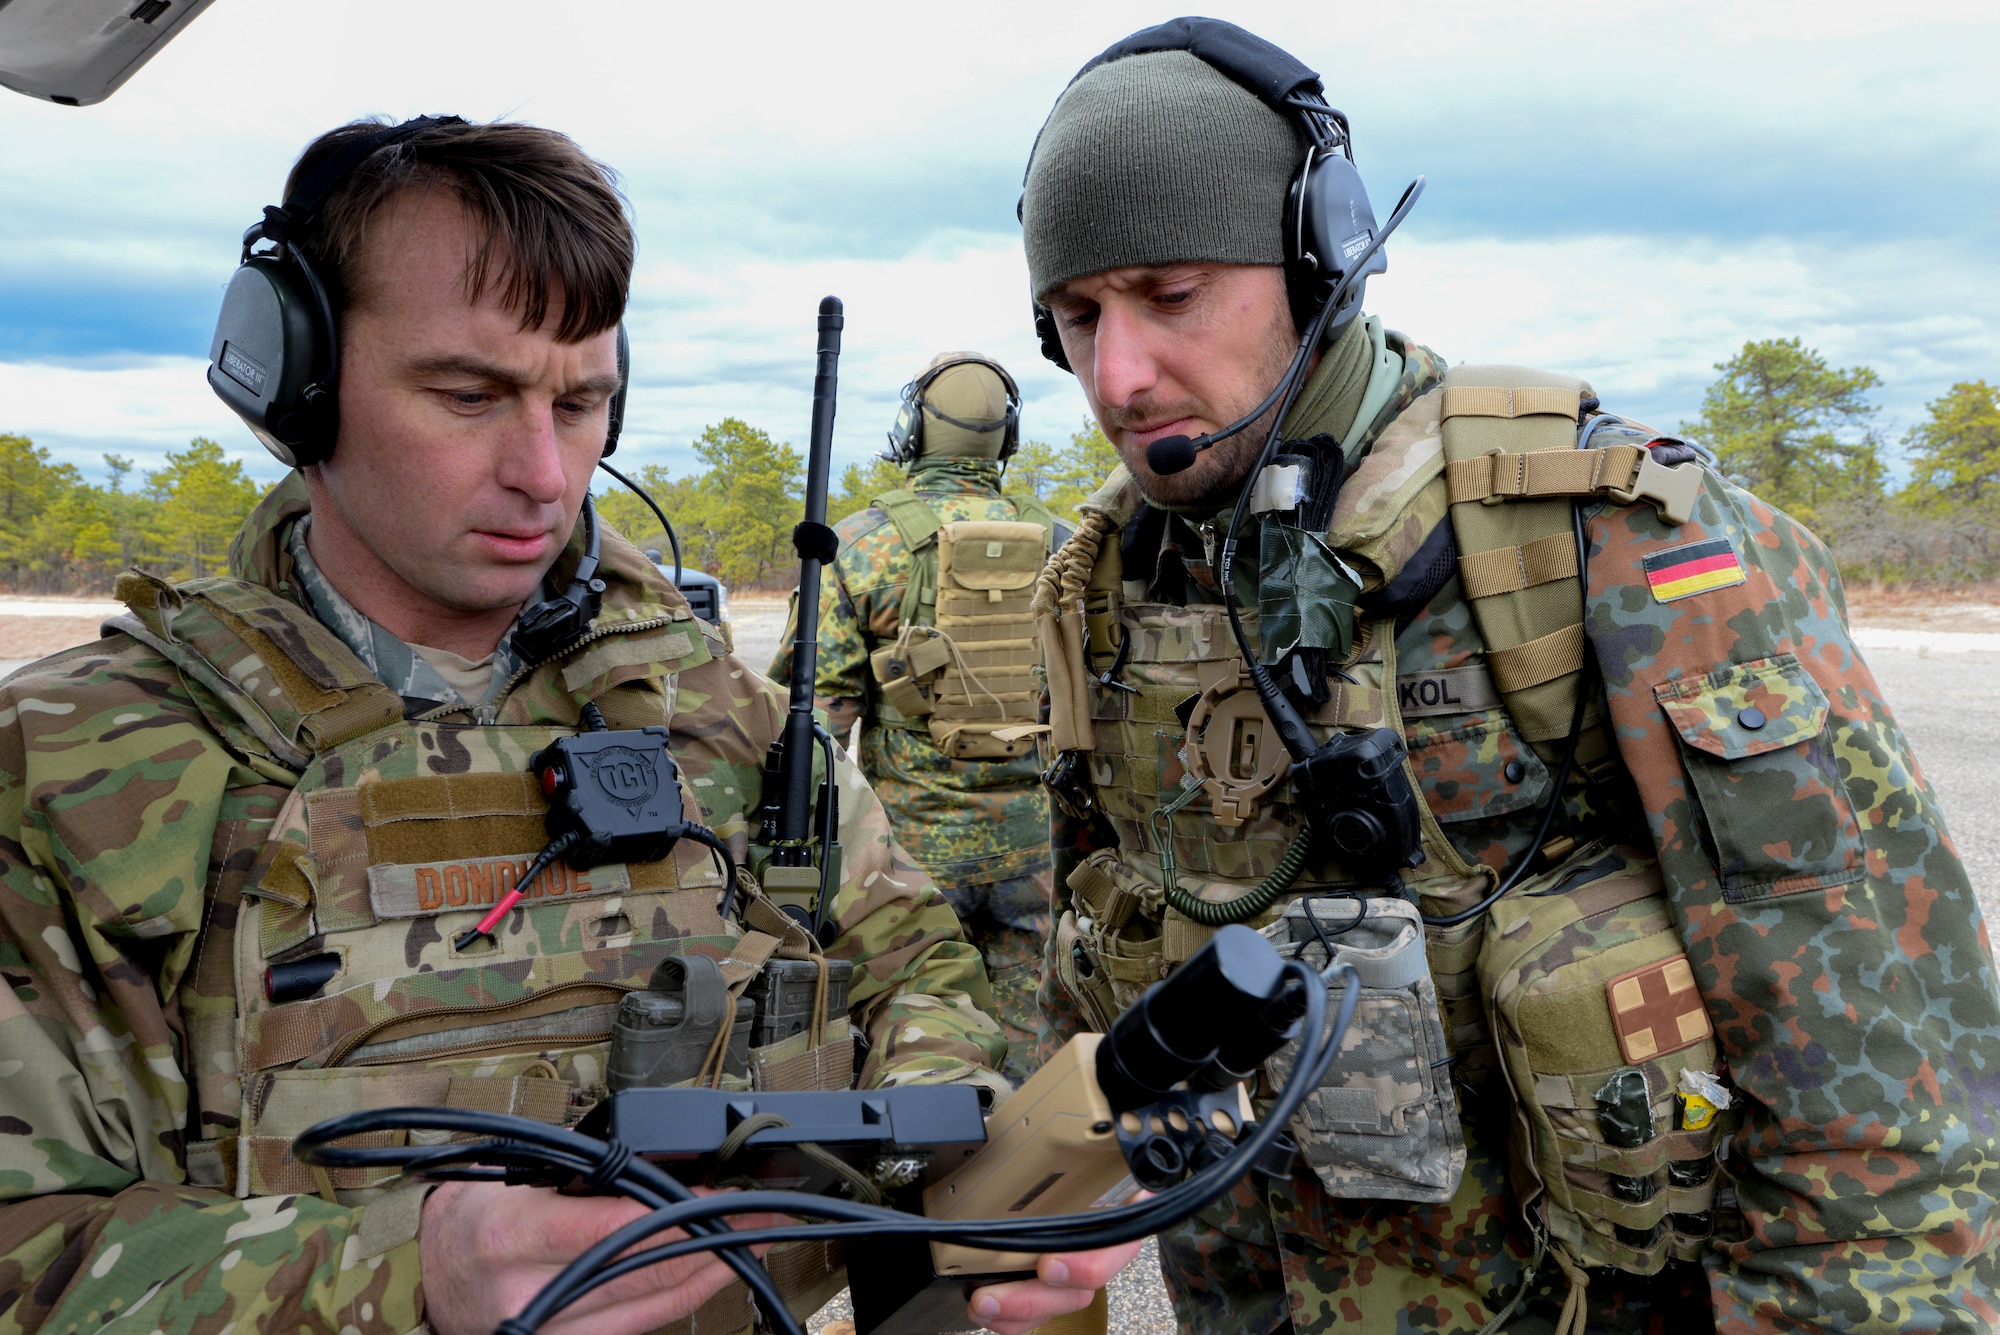 A picture of U.S. Air Force Tech. Sgt. Chris Donohue, Joint Terminal Attack Controller (JTAC) with the 227th Air Support Operations Squadron (ASOS), and German armed forces JTAC 1st Lt. Marius Sokol preparing equipment for close air support training.